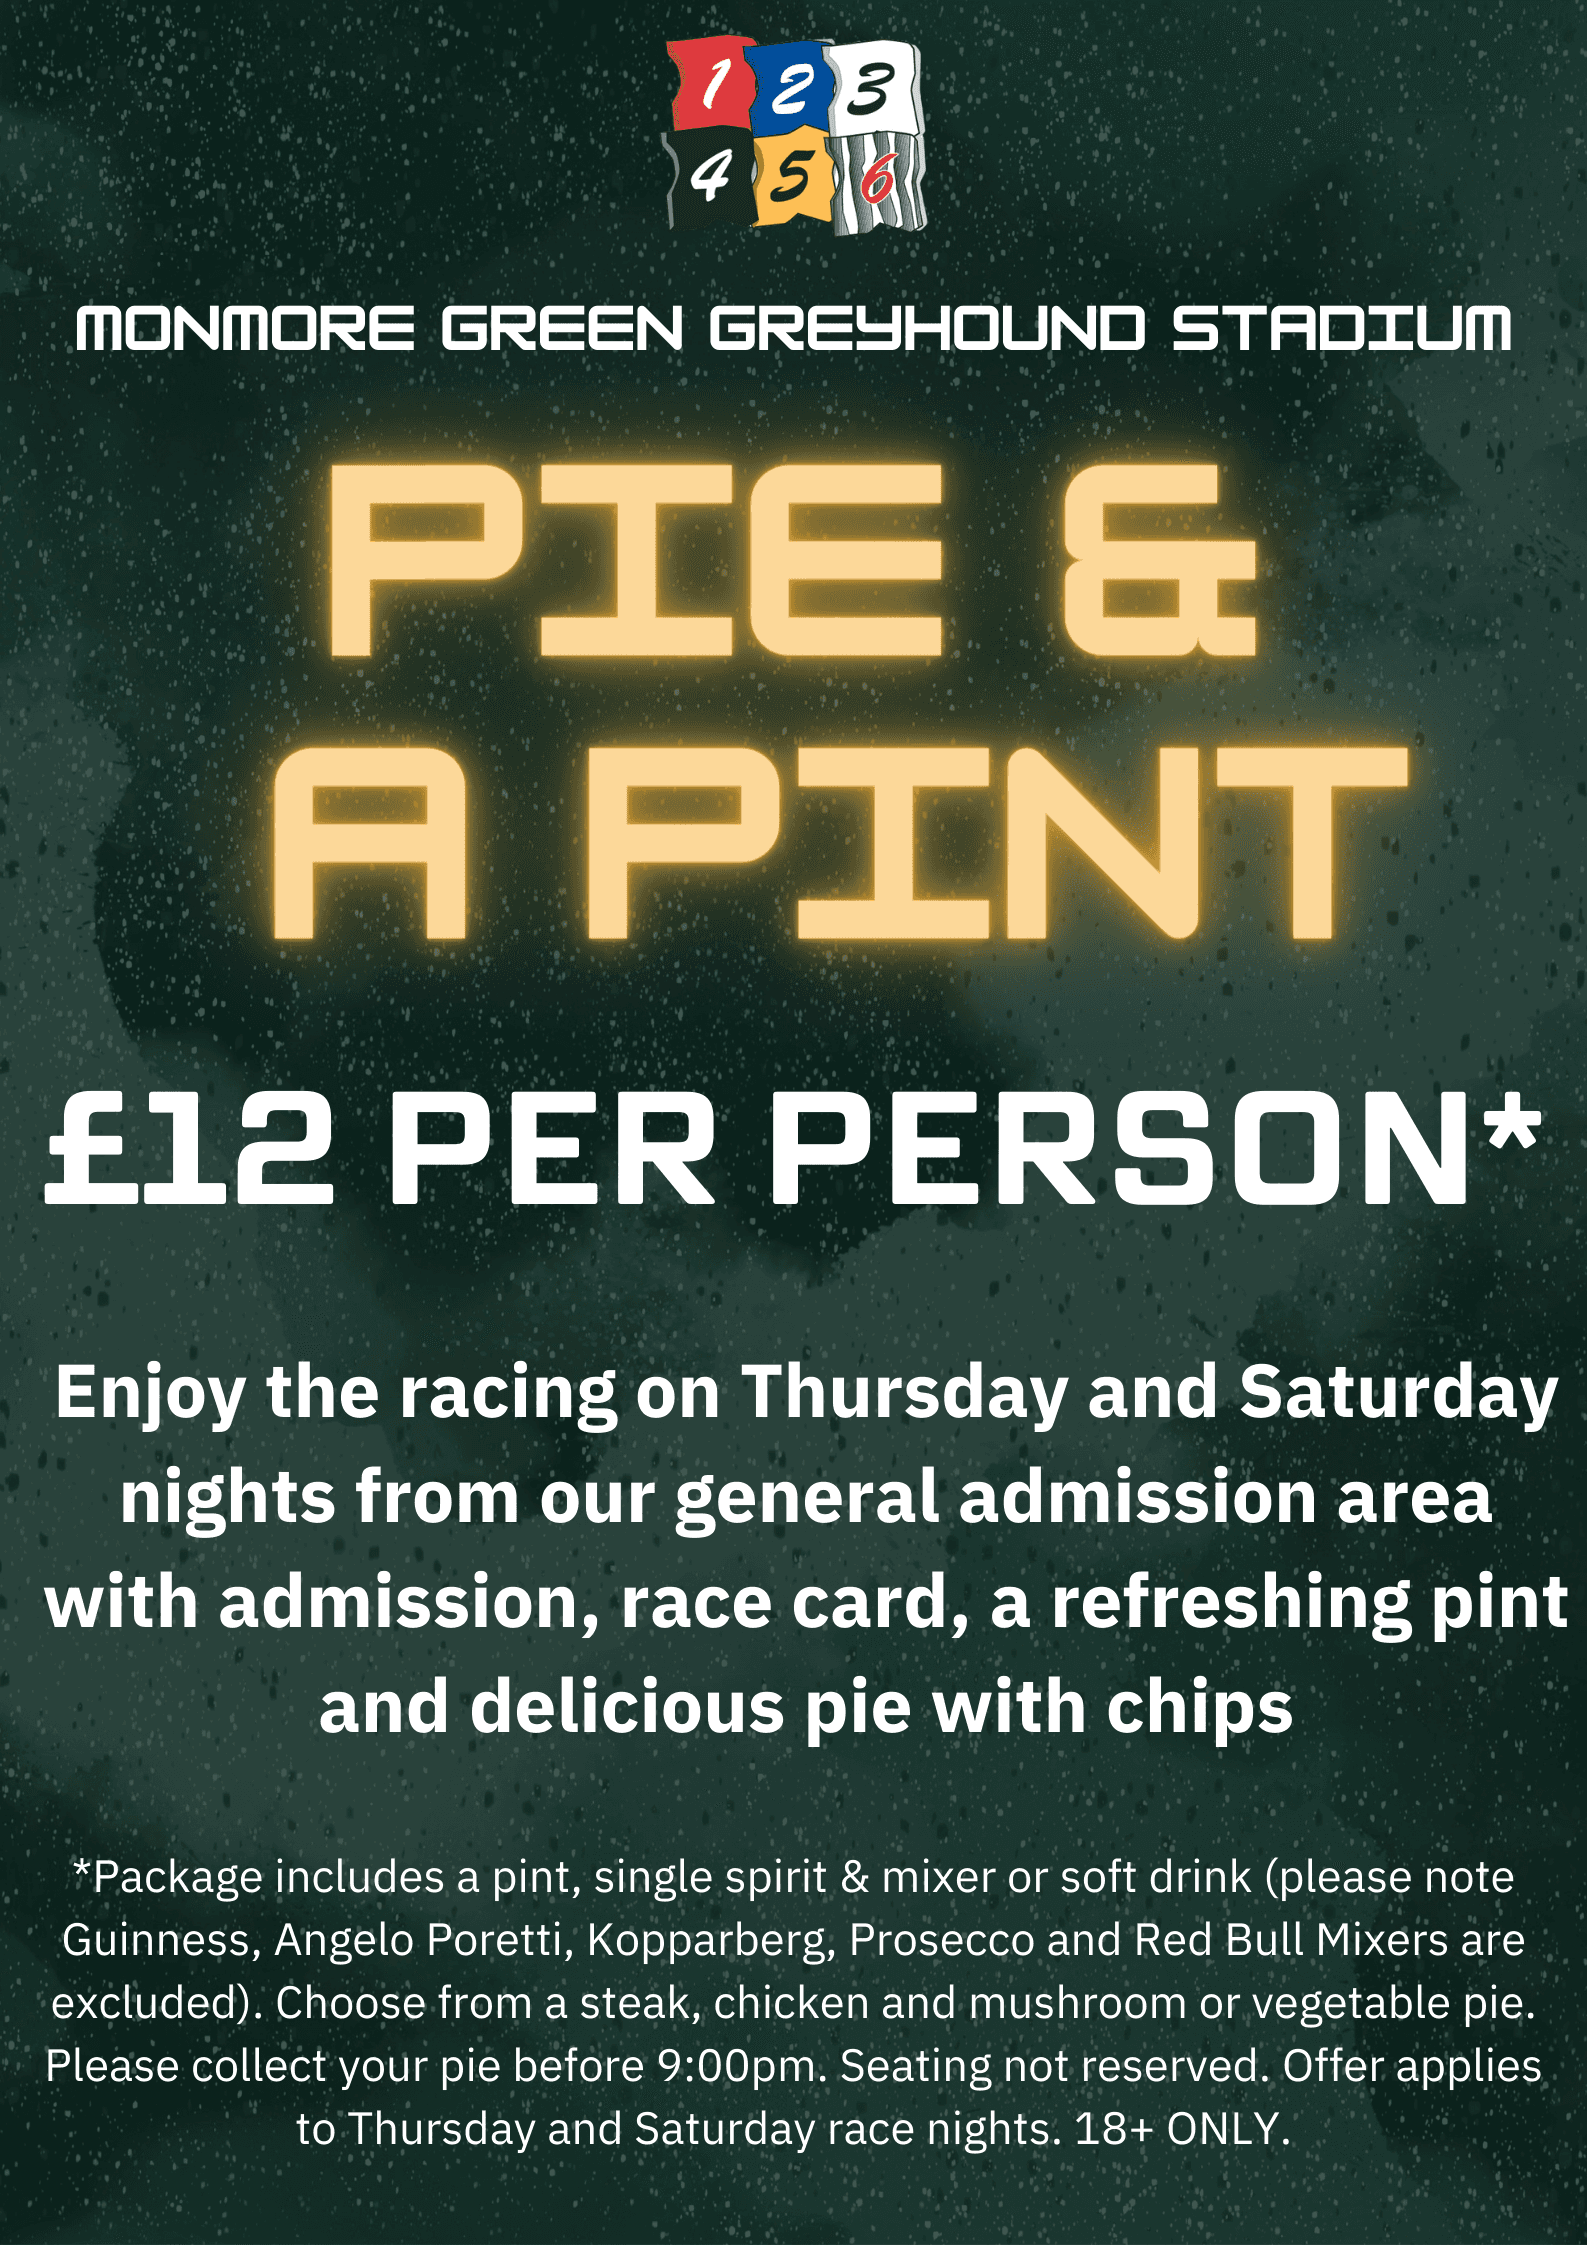 NEW TO MONMORE - PIE & A PINT DEAL